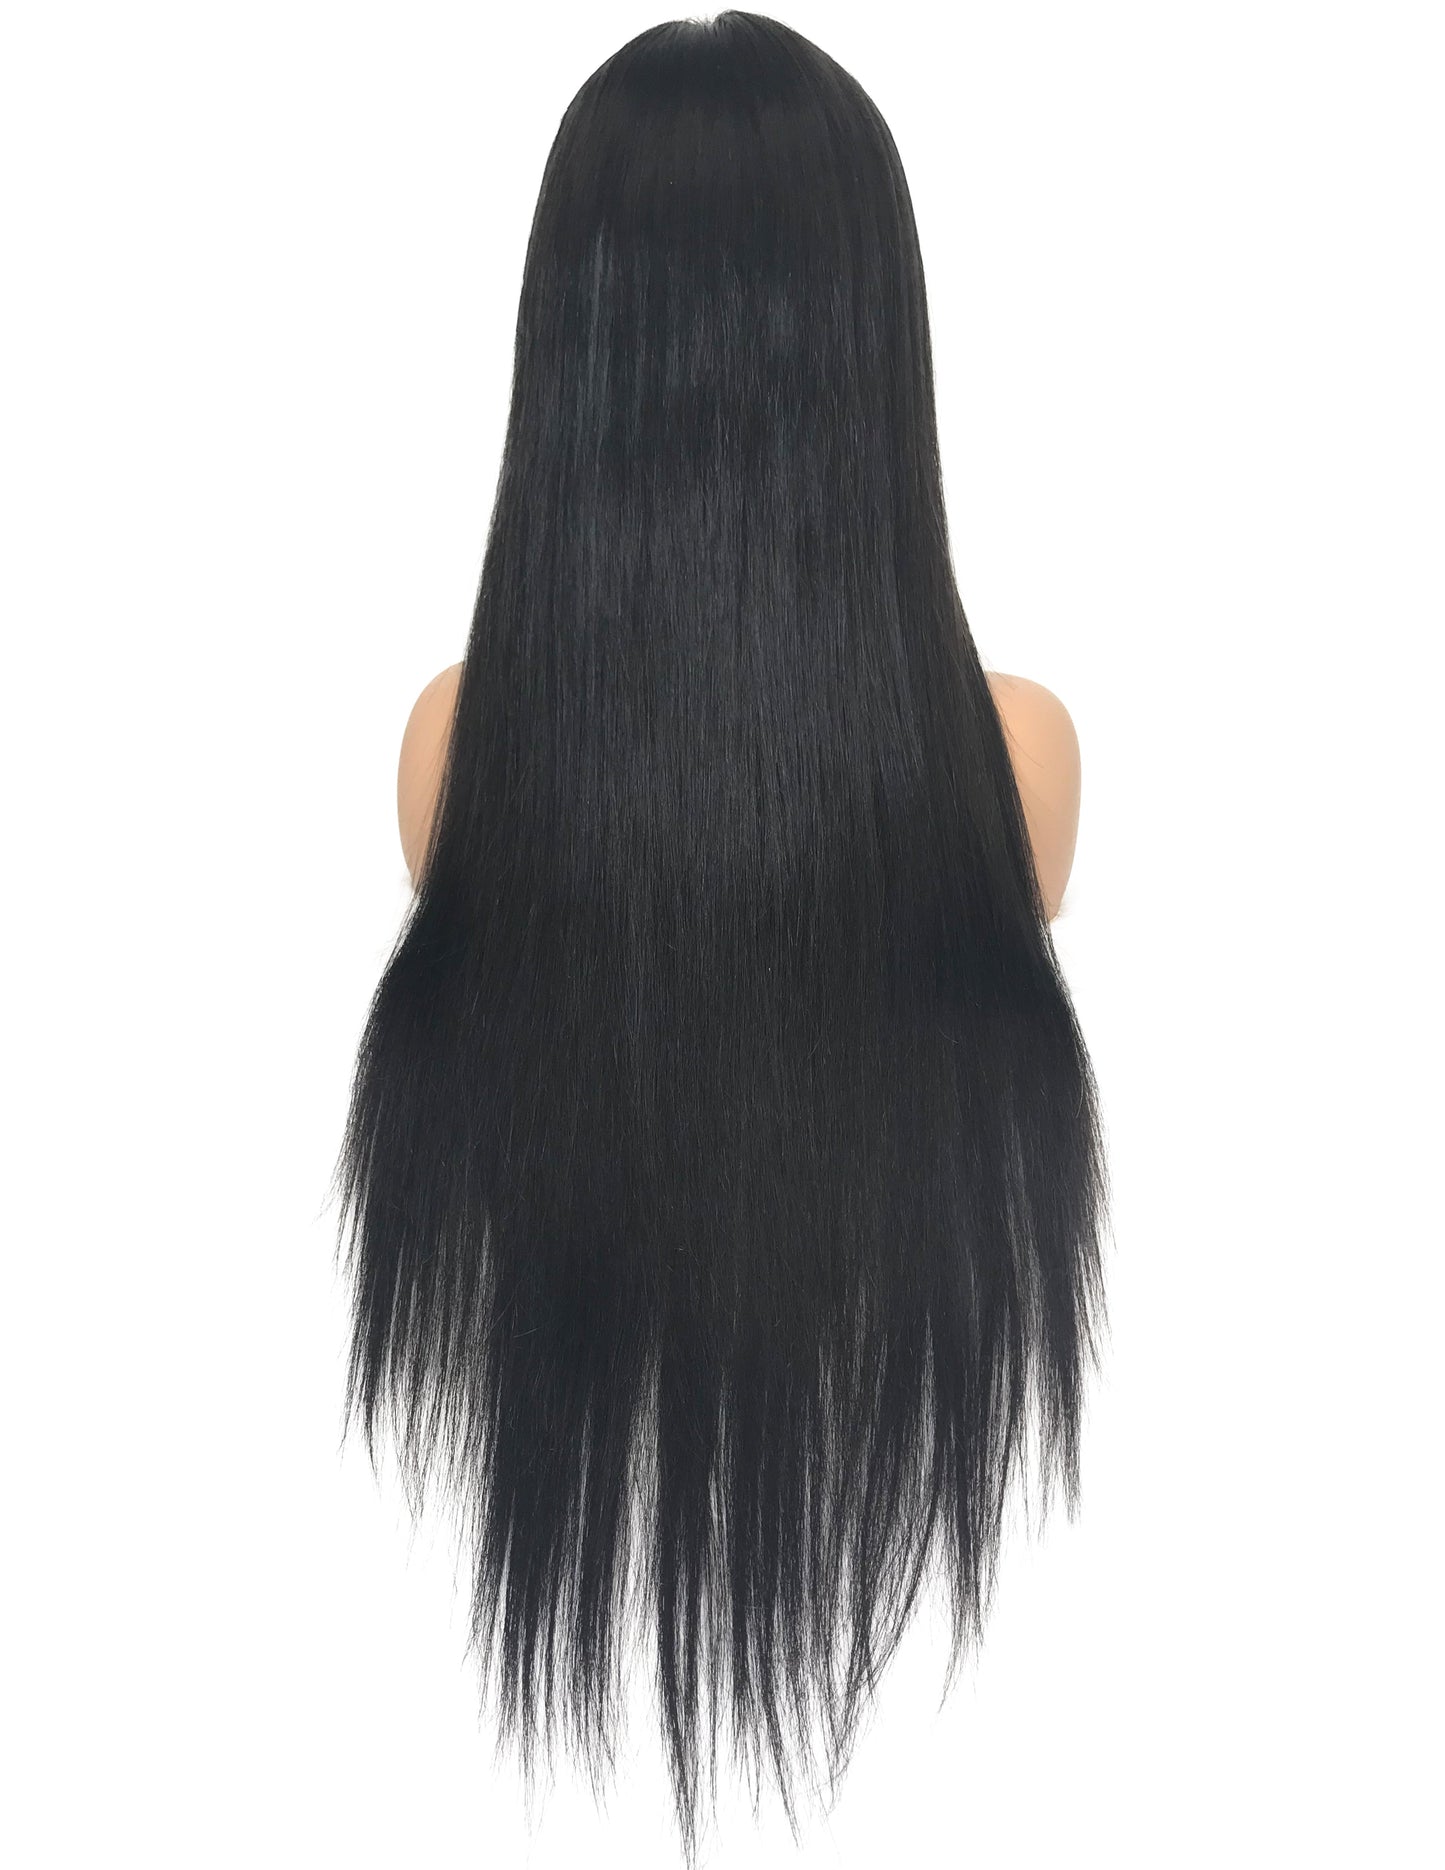 8A Malaysian Straight Lace Frontal Human Hair Wig - eHair Outlet